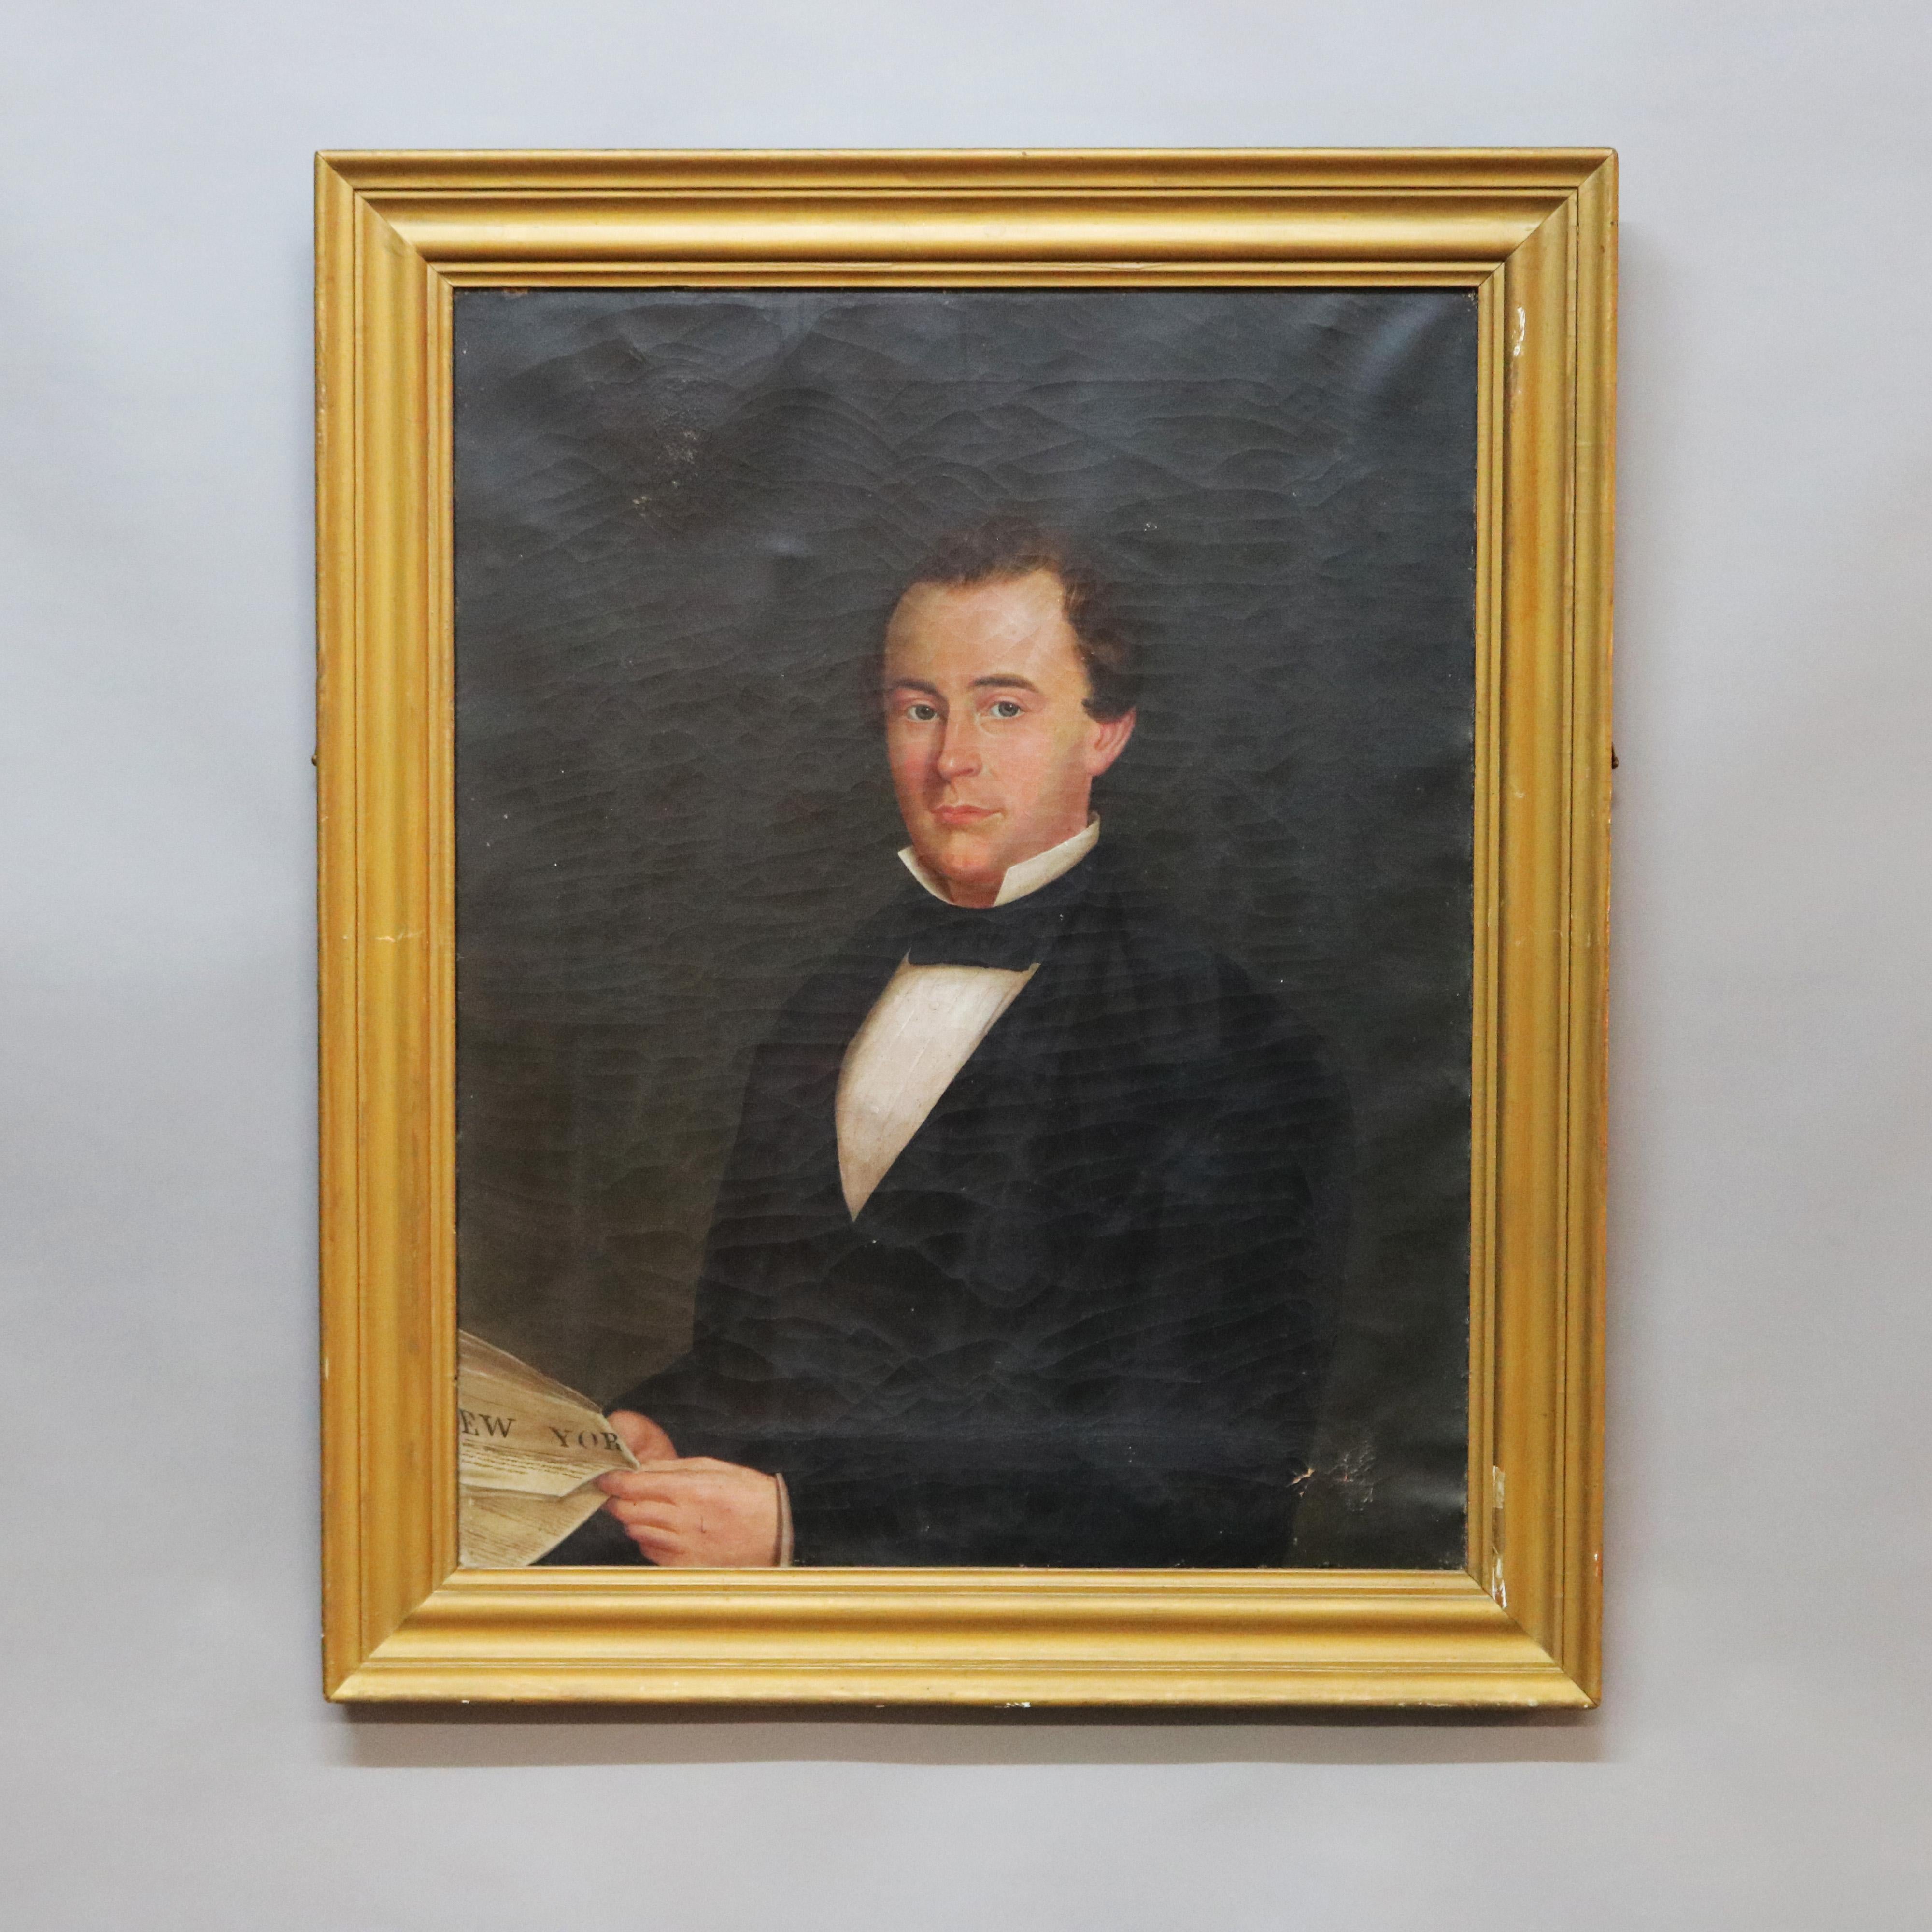 American Large Early Antique Portrait Painting, Gentleman Holding a NY Newspaper, c1850